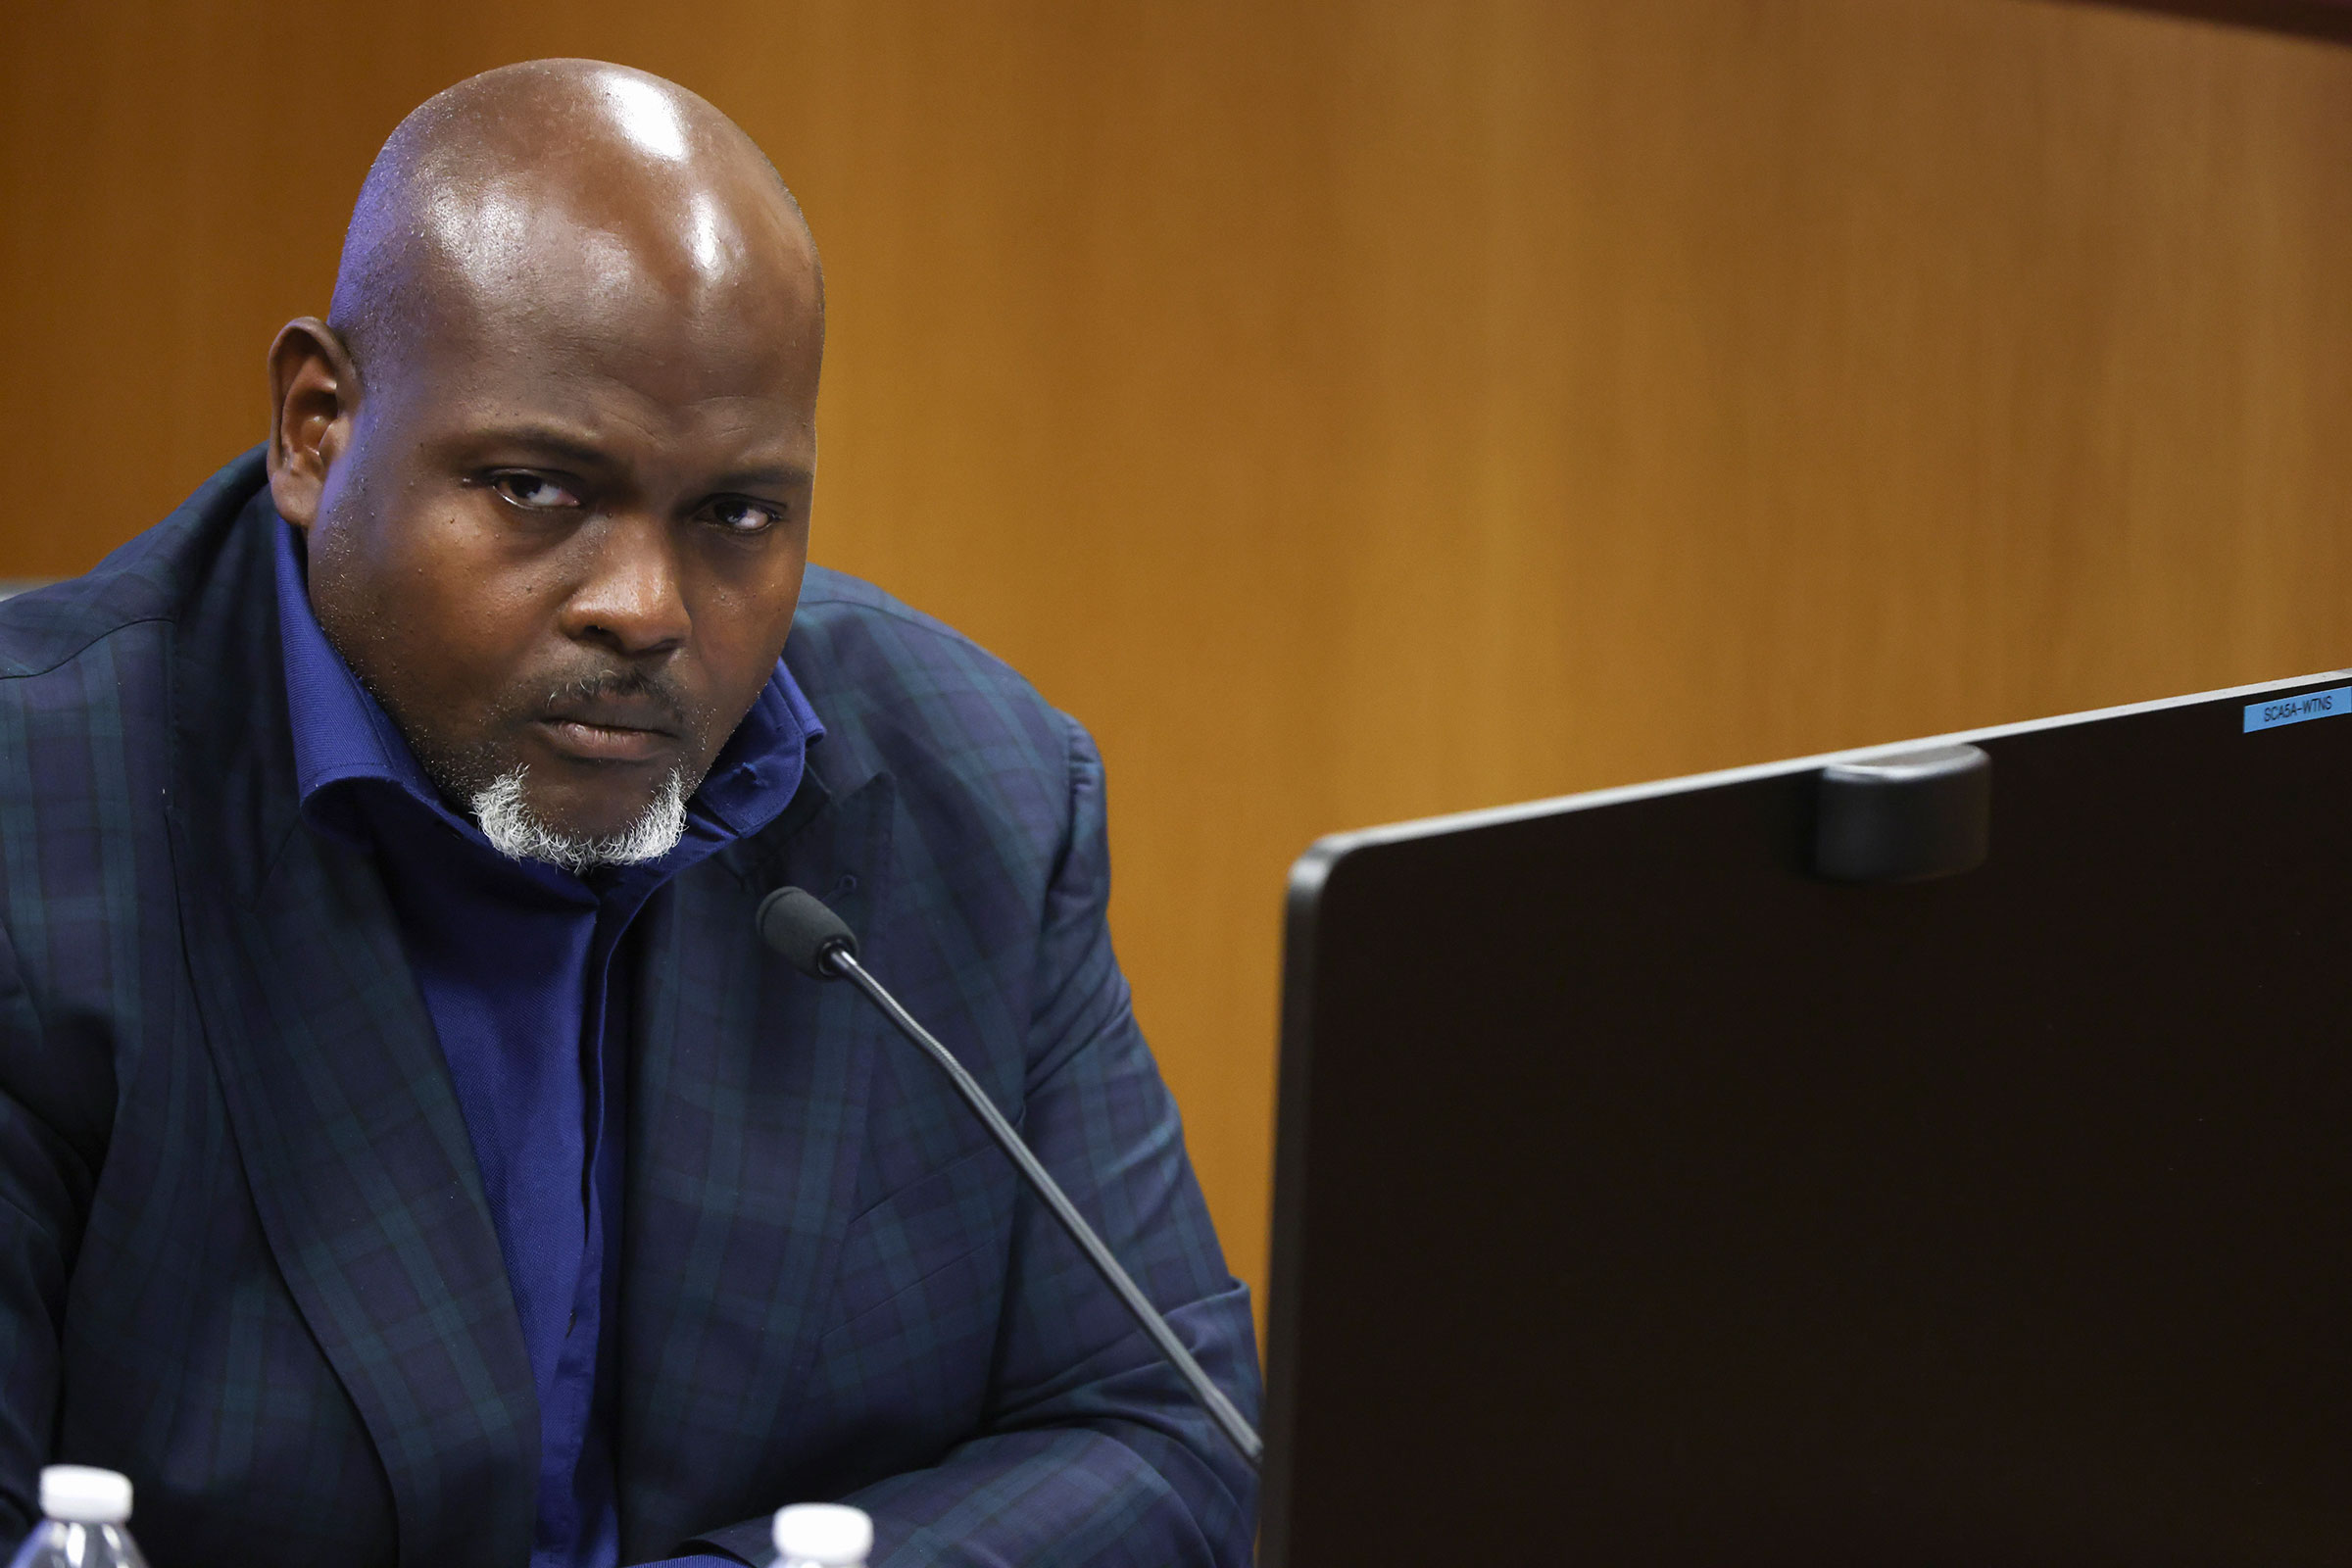 Witness Terrence Bradley looks on from the witness stand during a hearing in the case of the State of Georgia v. Donald John Trump at the Fulton County Courthouse on February 16, in Atlanta, Georgia.